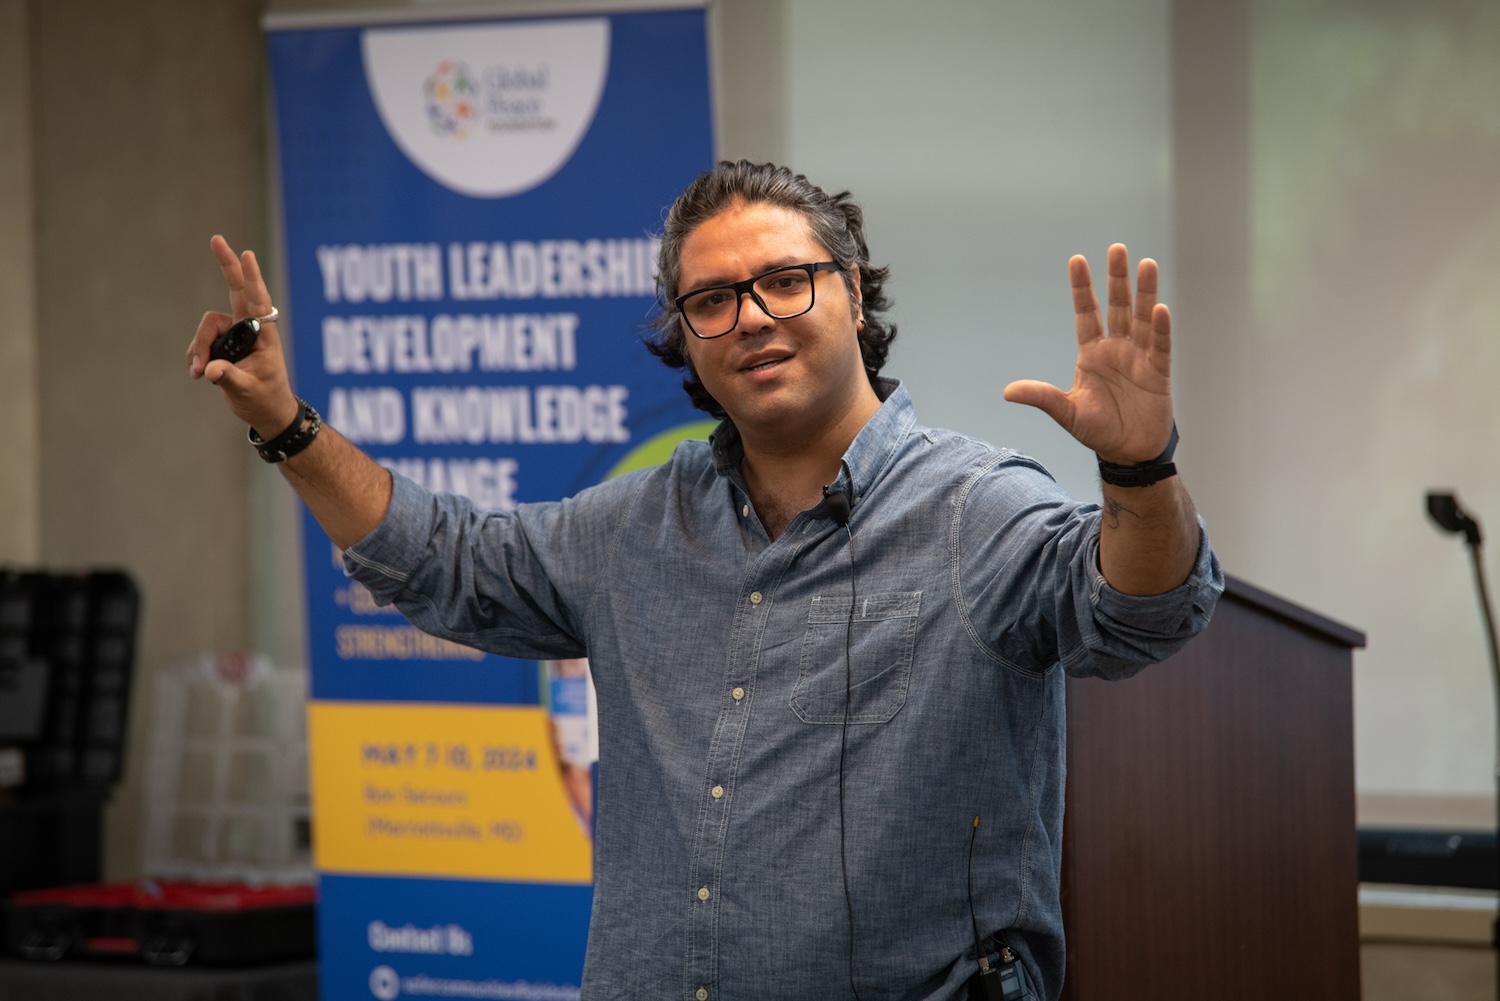 A person wearing glasses and a blue shirt is gesturing while speaking in front of a banner that reads "Youth Leadership Development and Knowledge Exchange," inspiring future youth leaders.